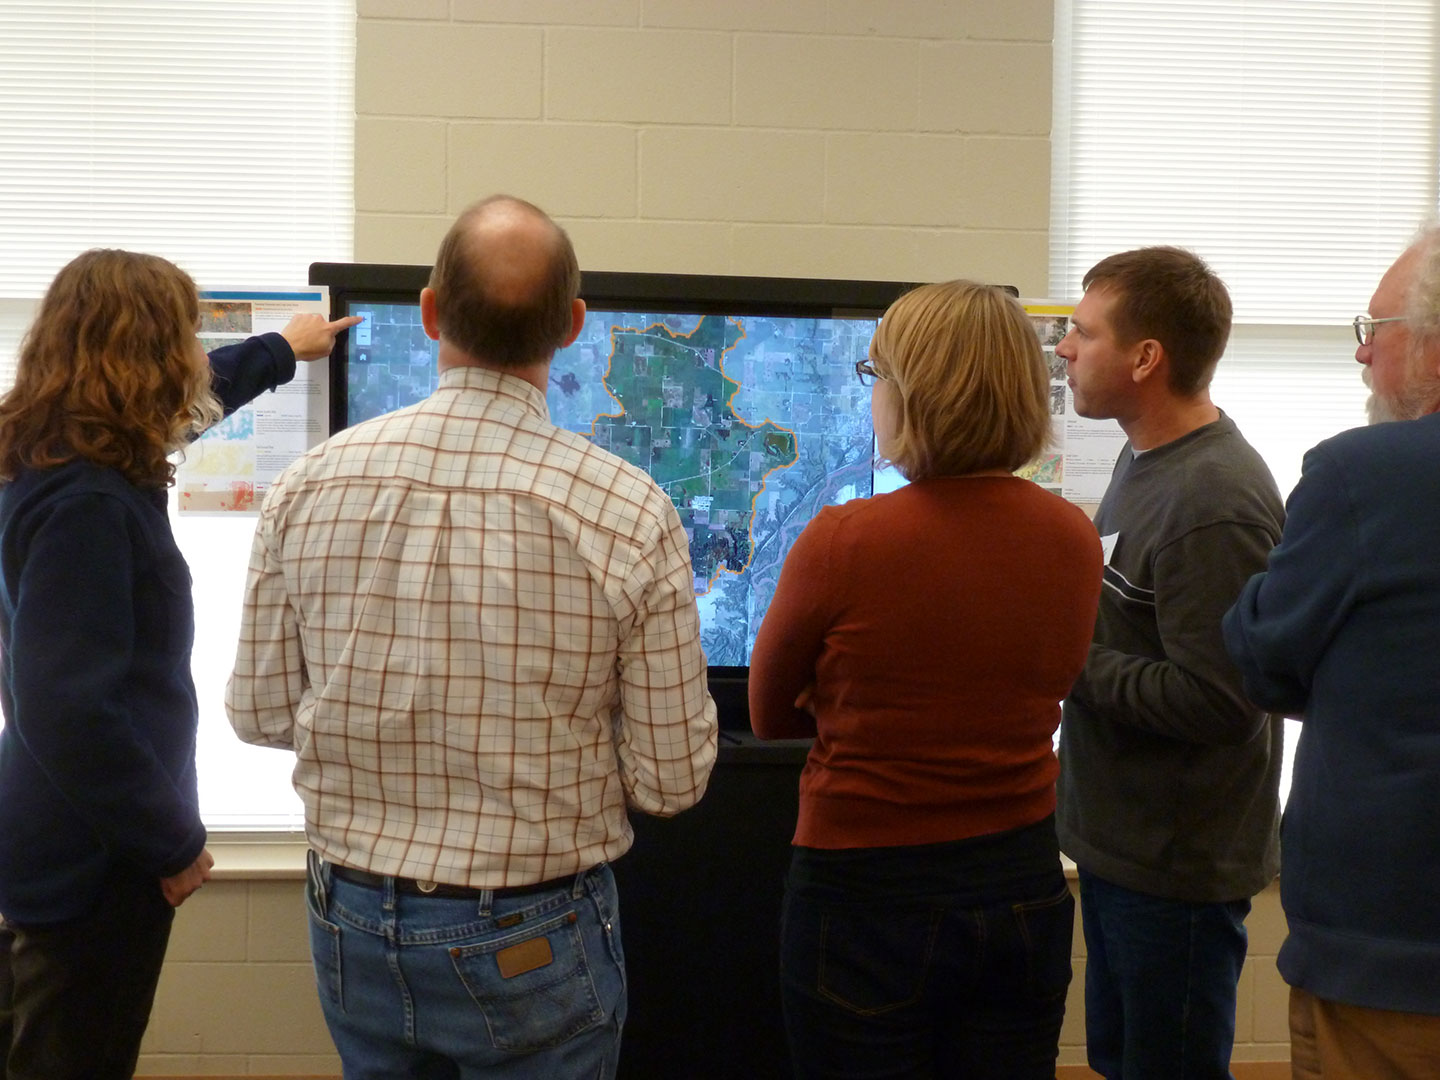 Group of stakeholders working around a 55” touchscreen